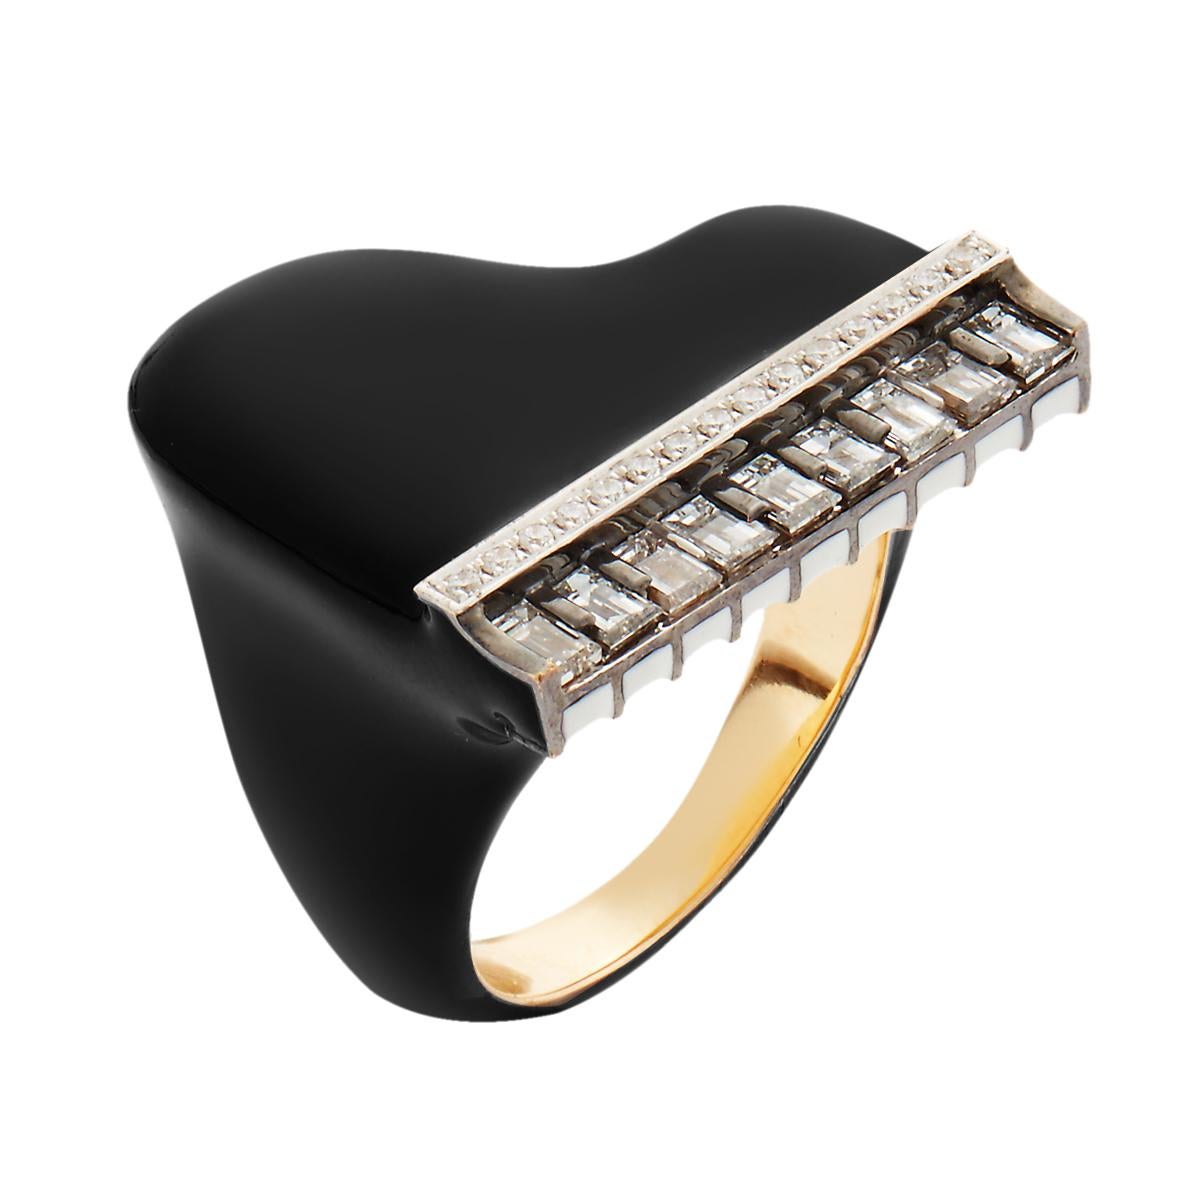 18k yellow gold Piano ring finished with Black enamel and set with baguette diamond 